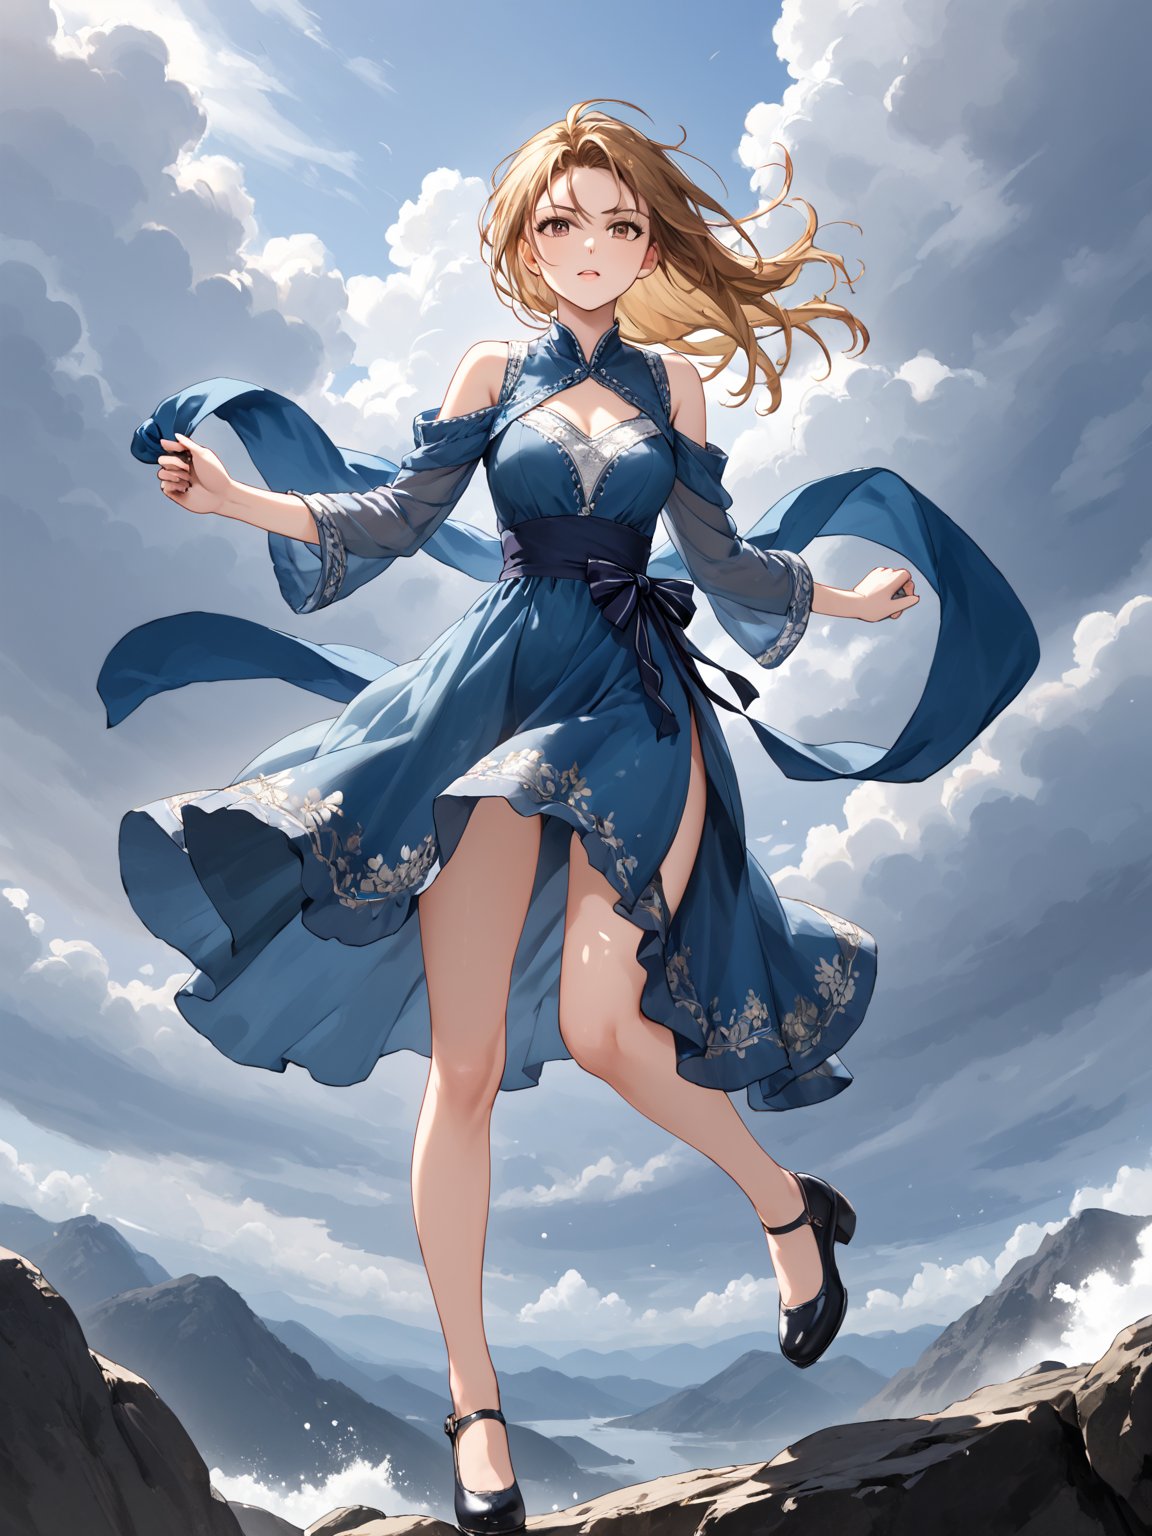 masterpiece, best quality, highres
,//Character, 
1girl, solo
,//Fashion, 
,//Background, white background
,//Others, ,Expressiveh, 
,AobaTsukuyo,
The girl climbing a steep, rocky cliff face. Her dress is slightly torn, and her hair is windswept. She's reaching for a handhold, determination evident on her face. Dark storm clouds gather in the background, adding drama to the scene.